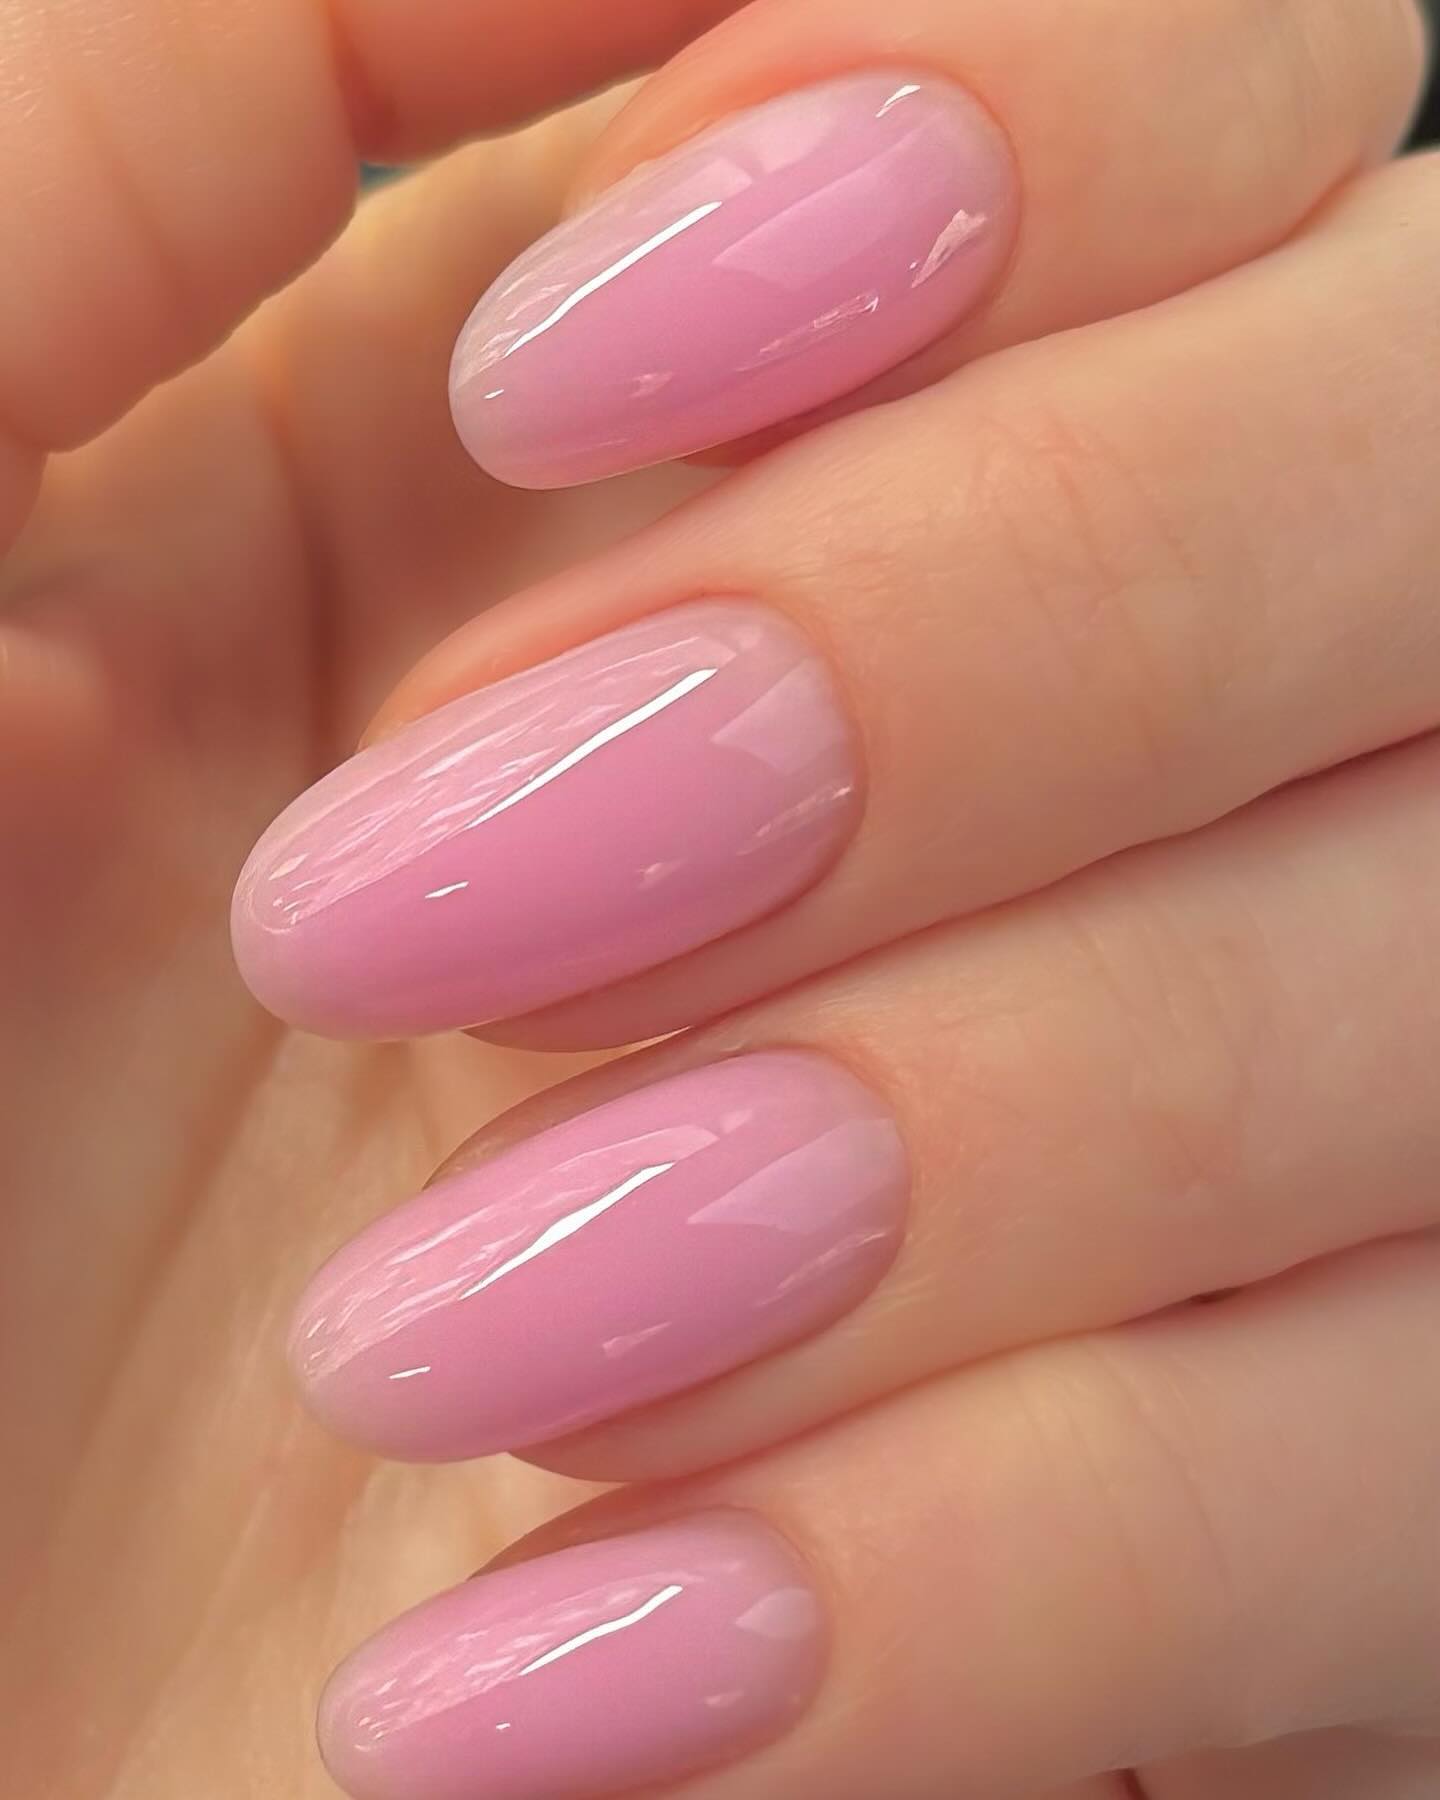 Hand with long nails painted with baby pink nail polish